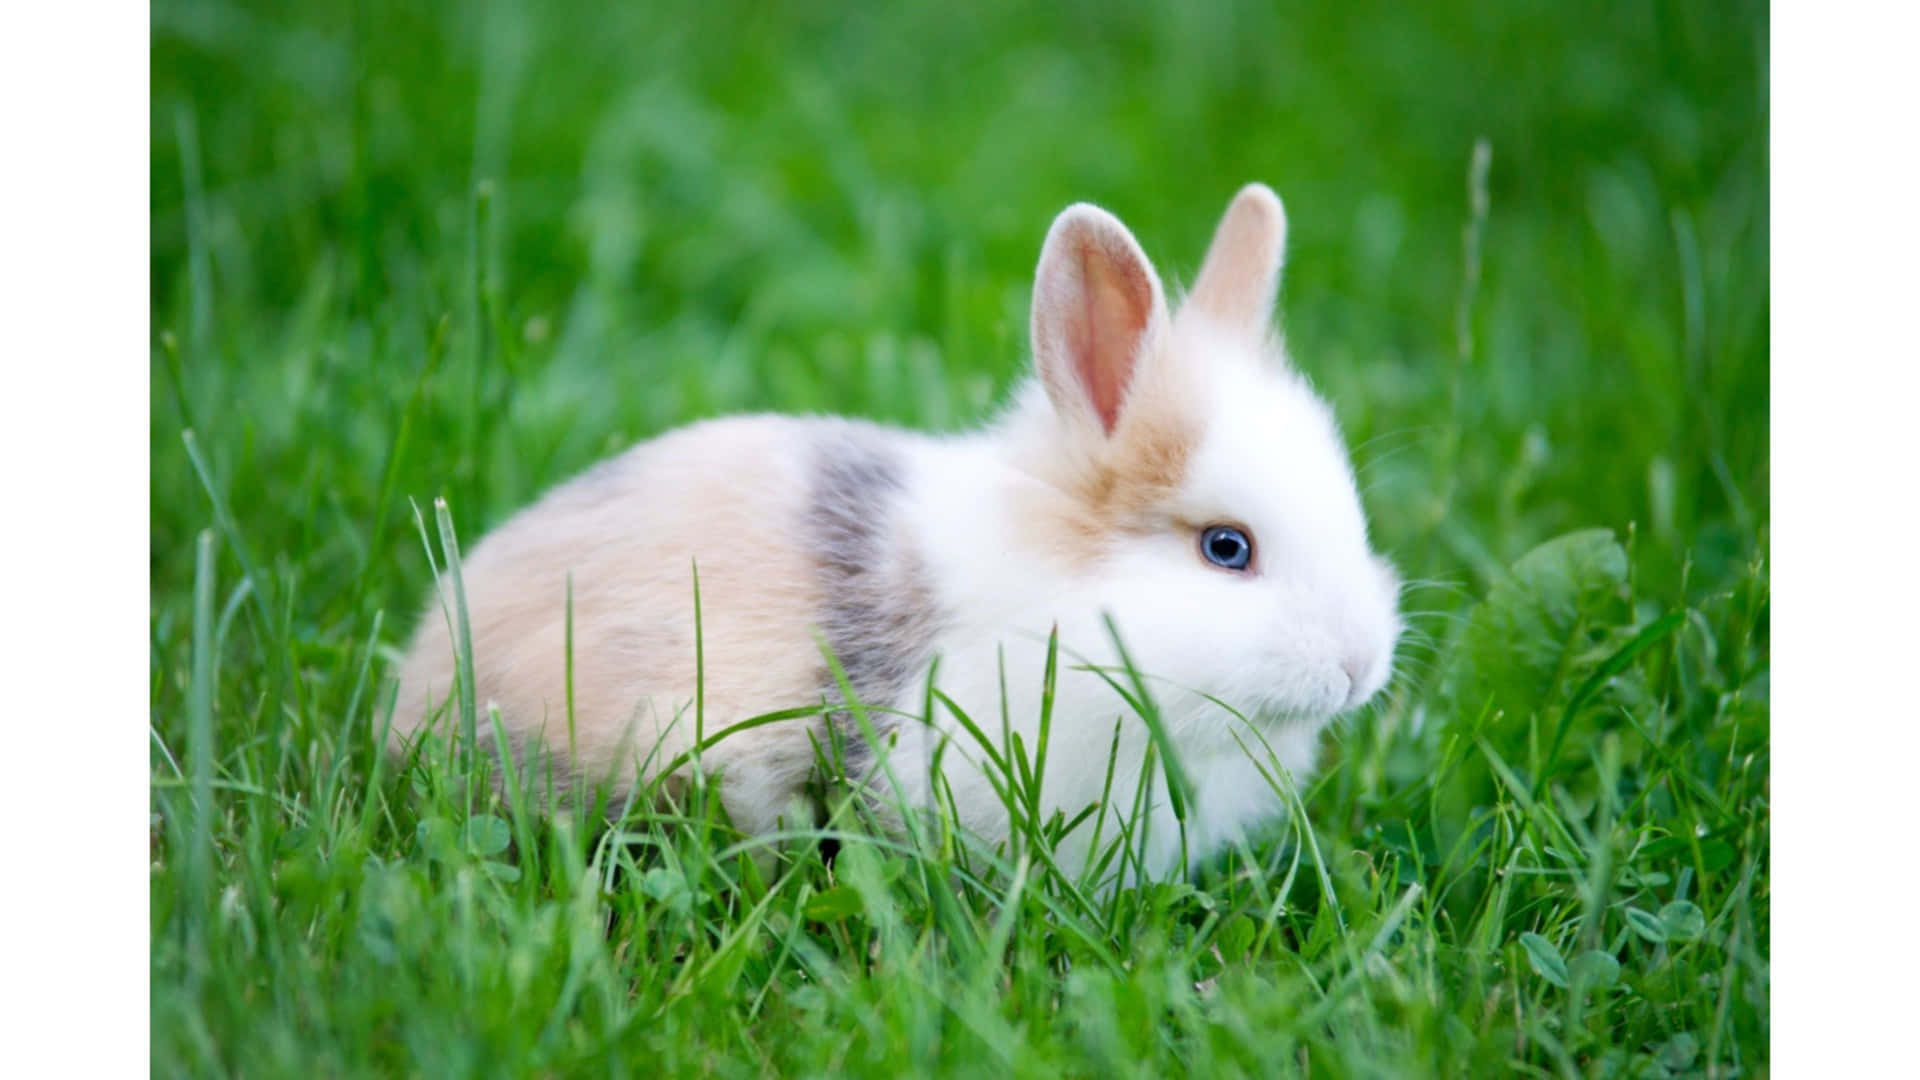 A Rabbit Sitting In The Grass Wallpaper